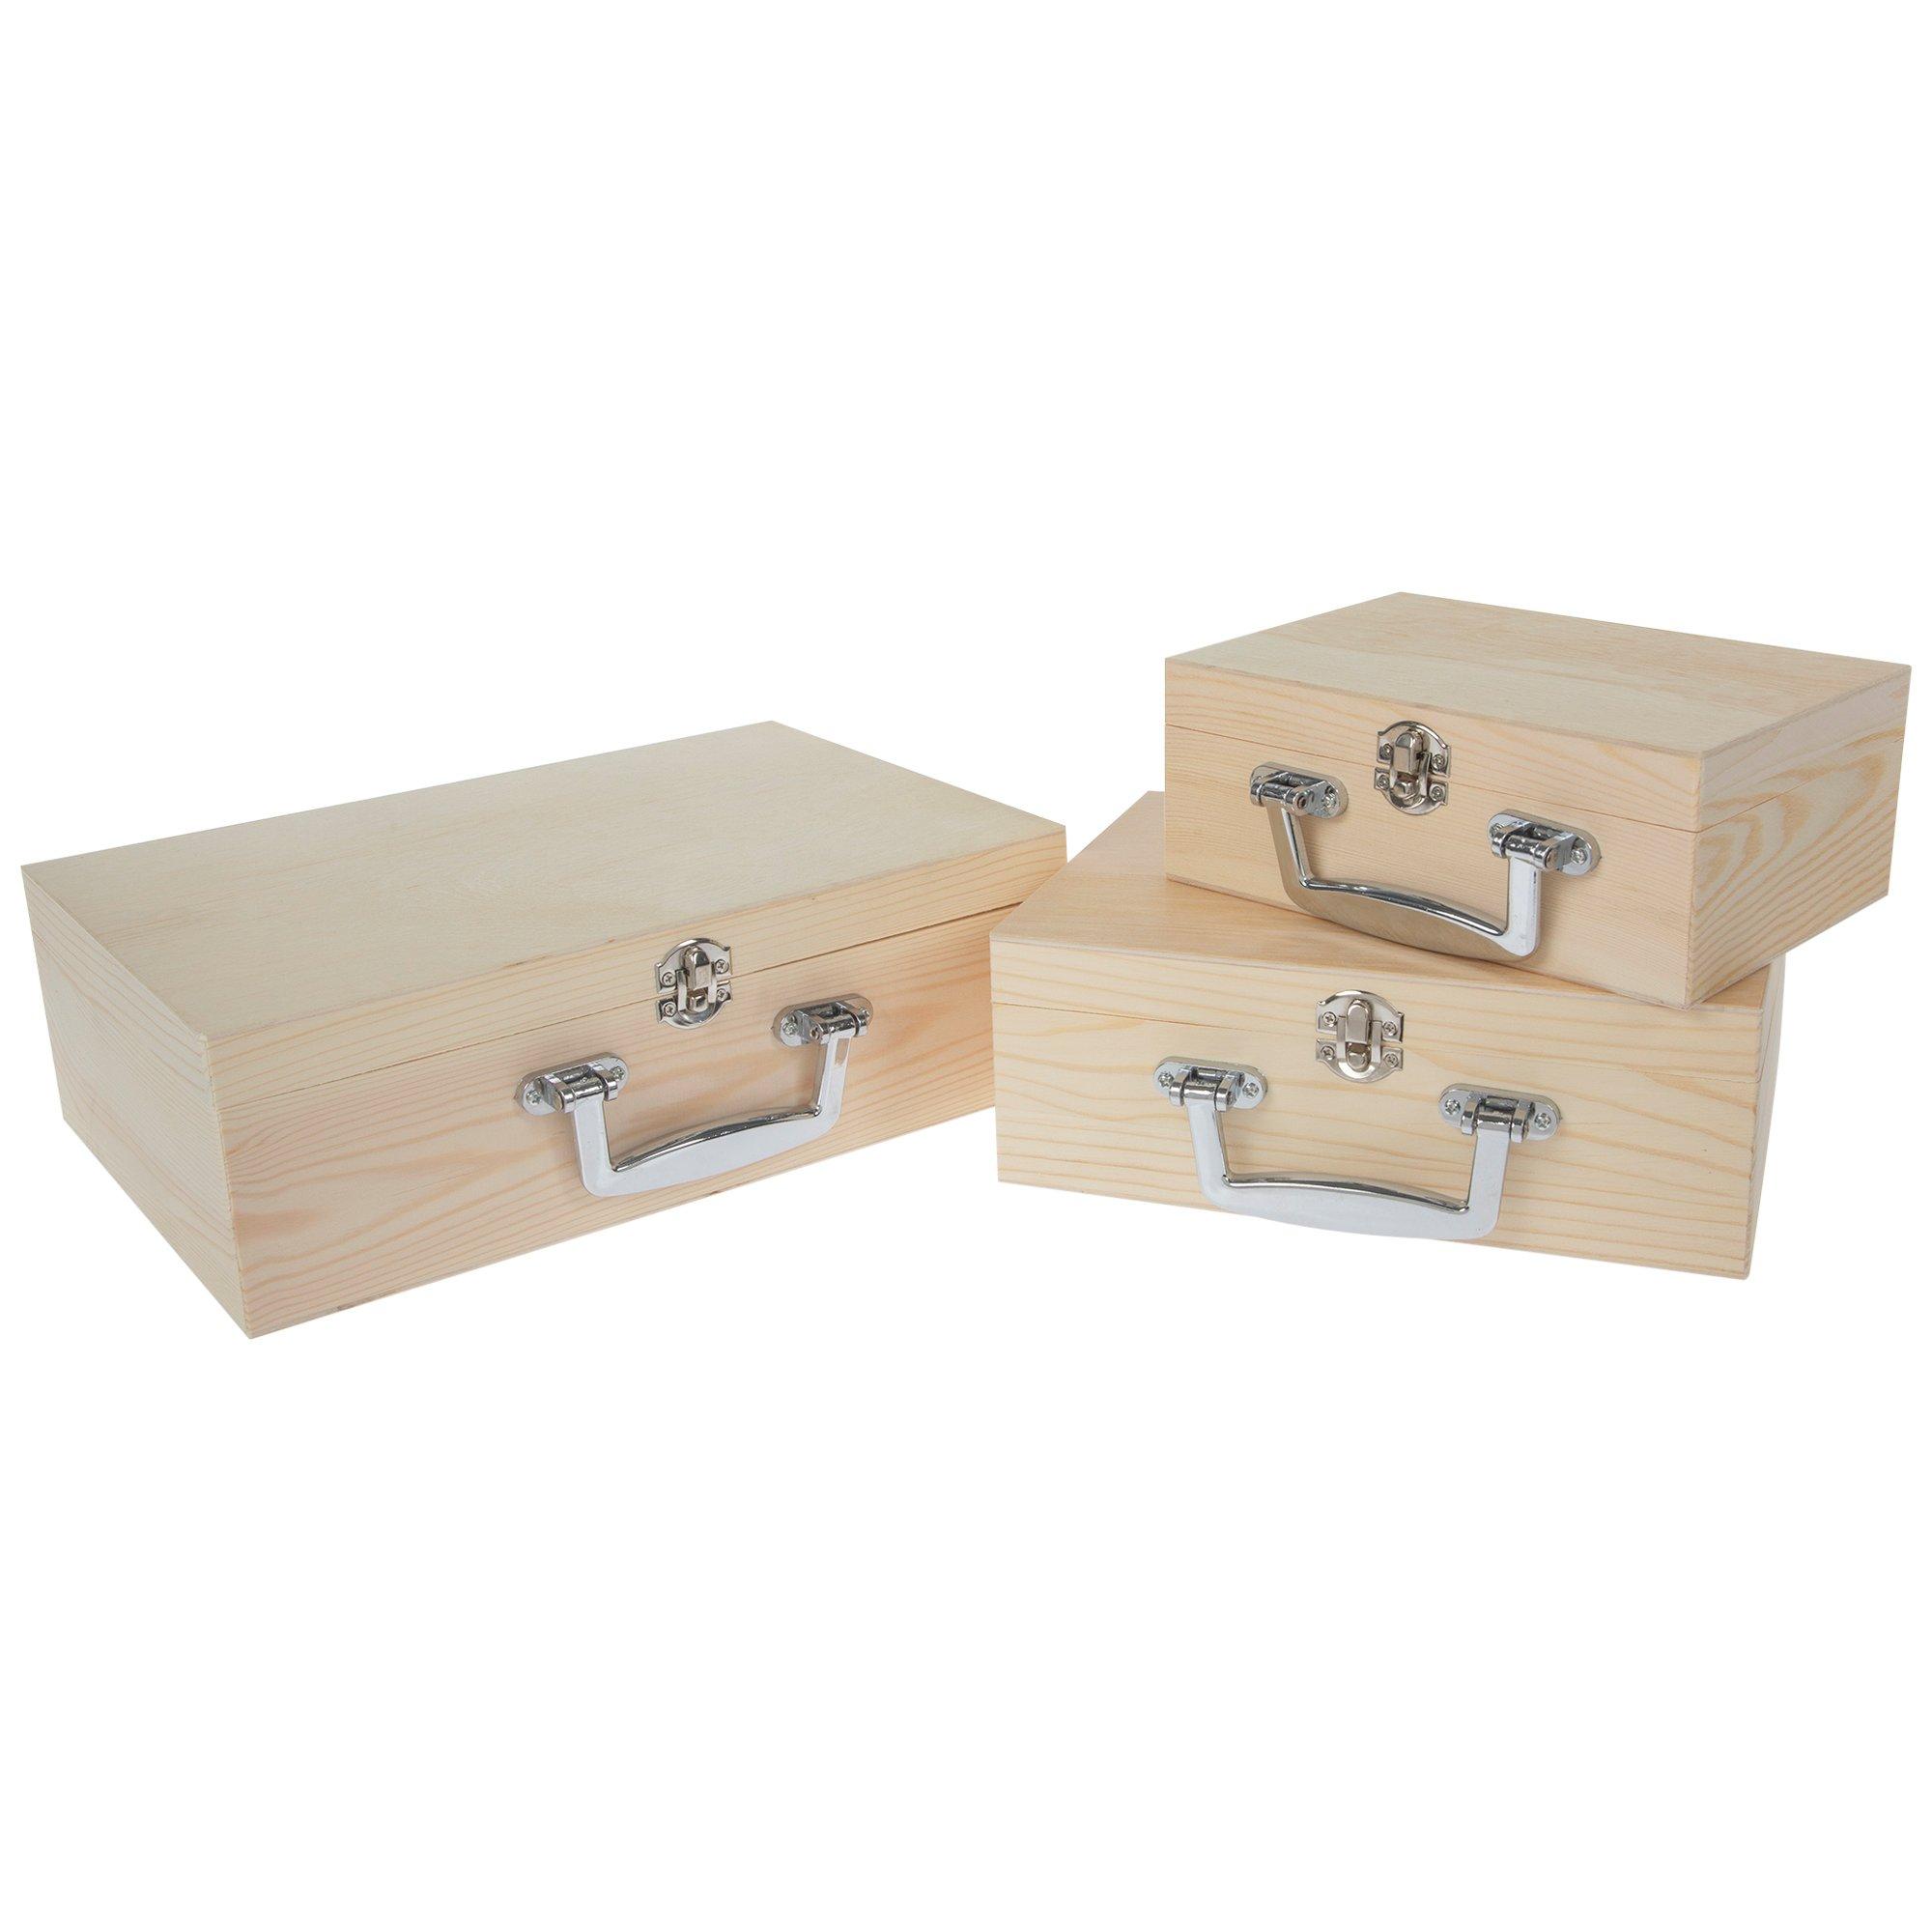 Latch Hooks: For Wood Box Craft, Wooden Boxes, Box Purse or